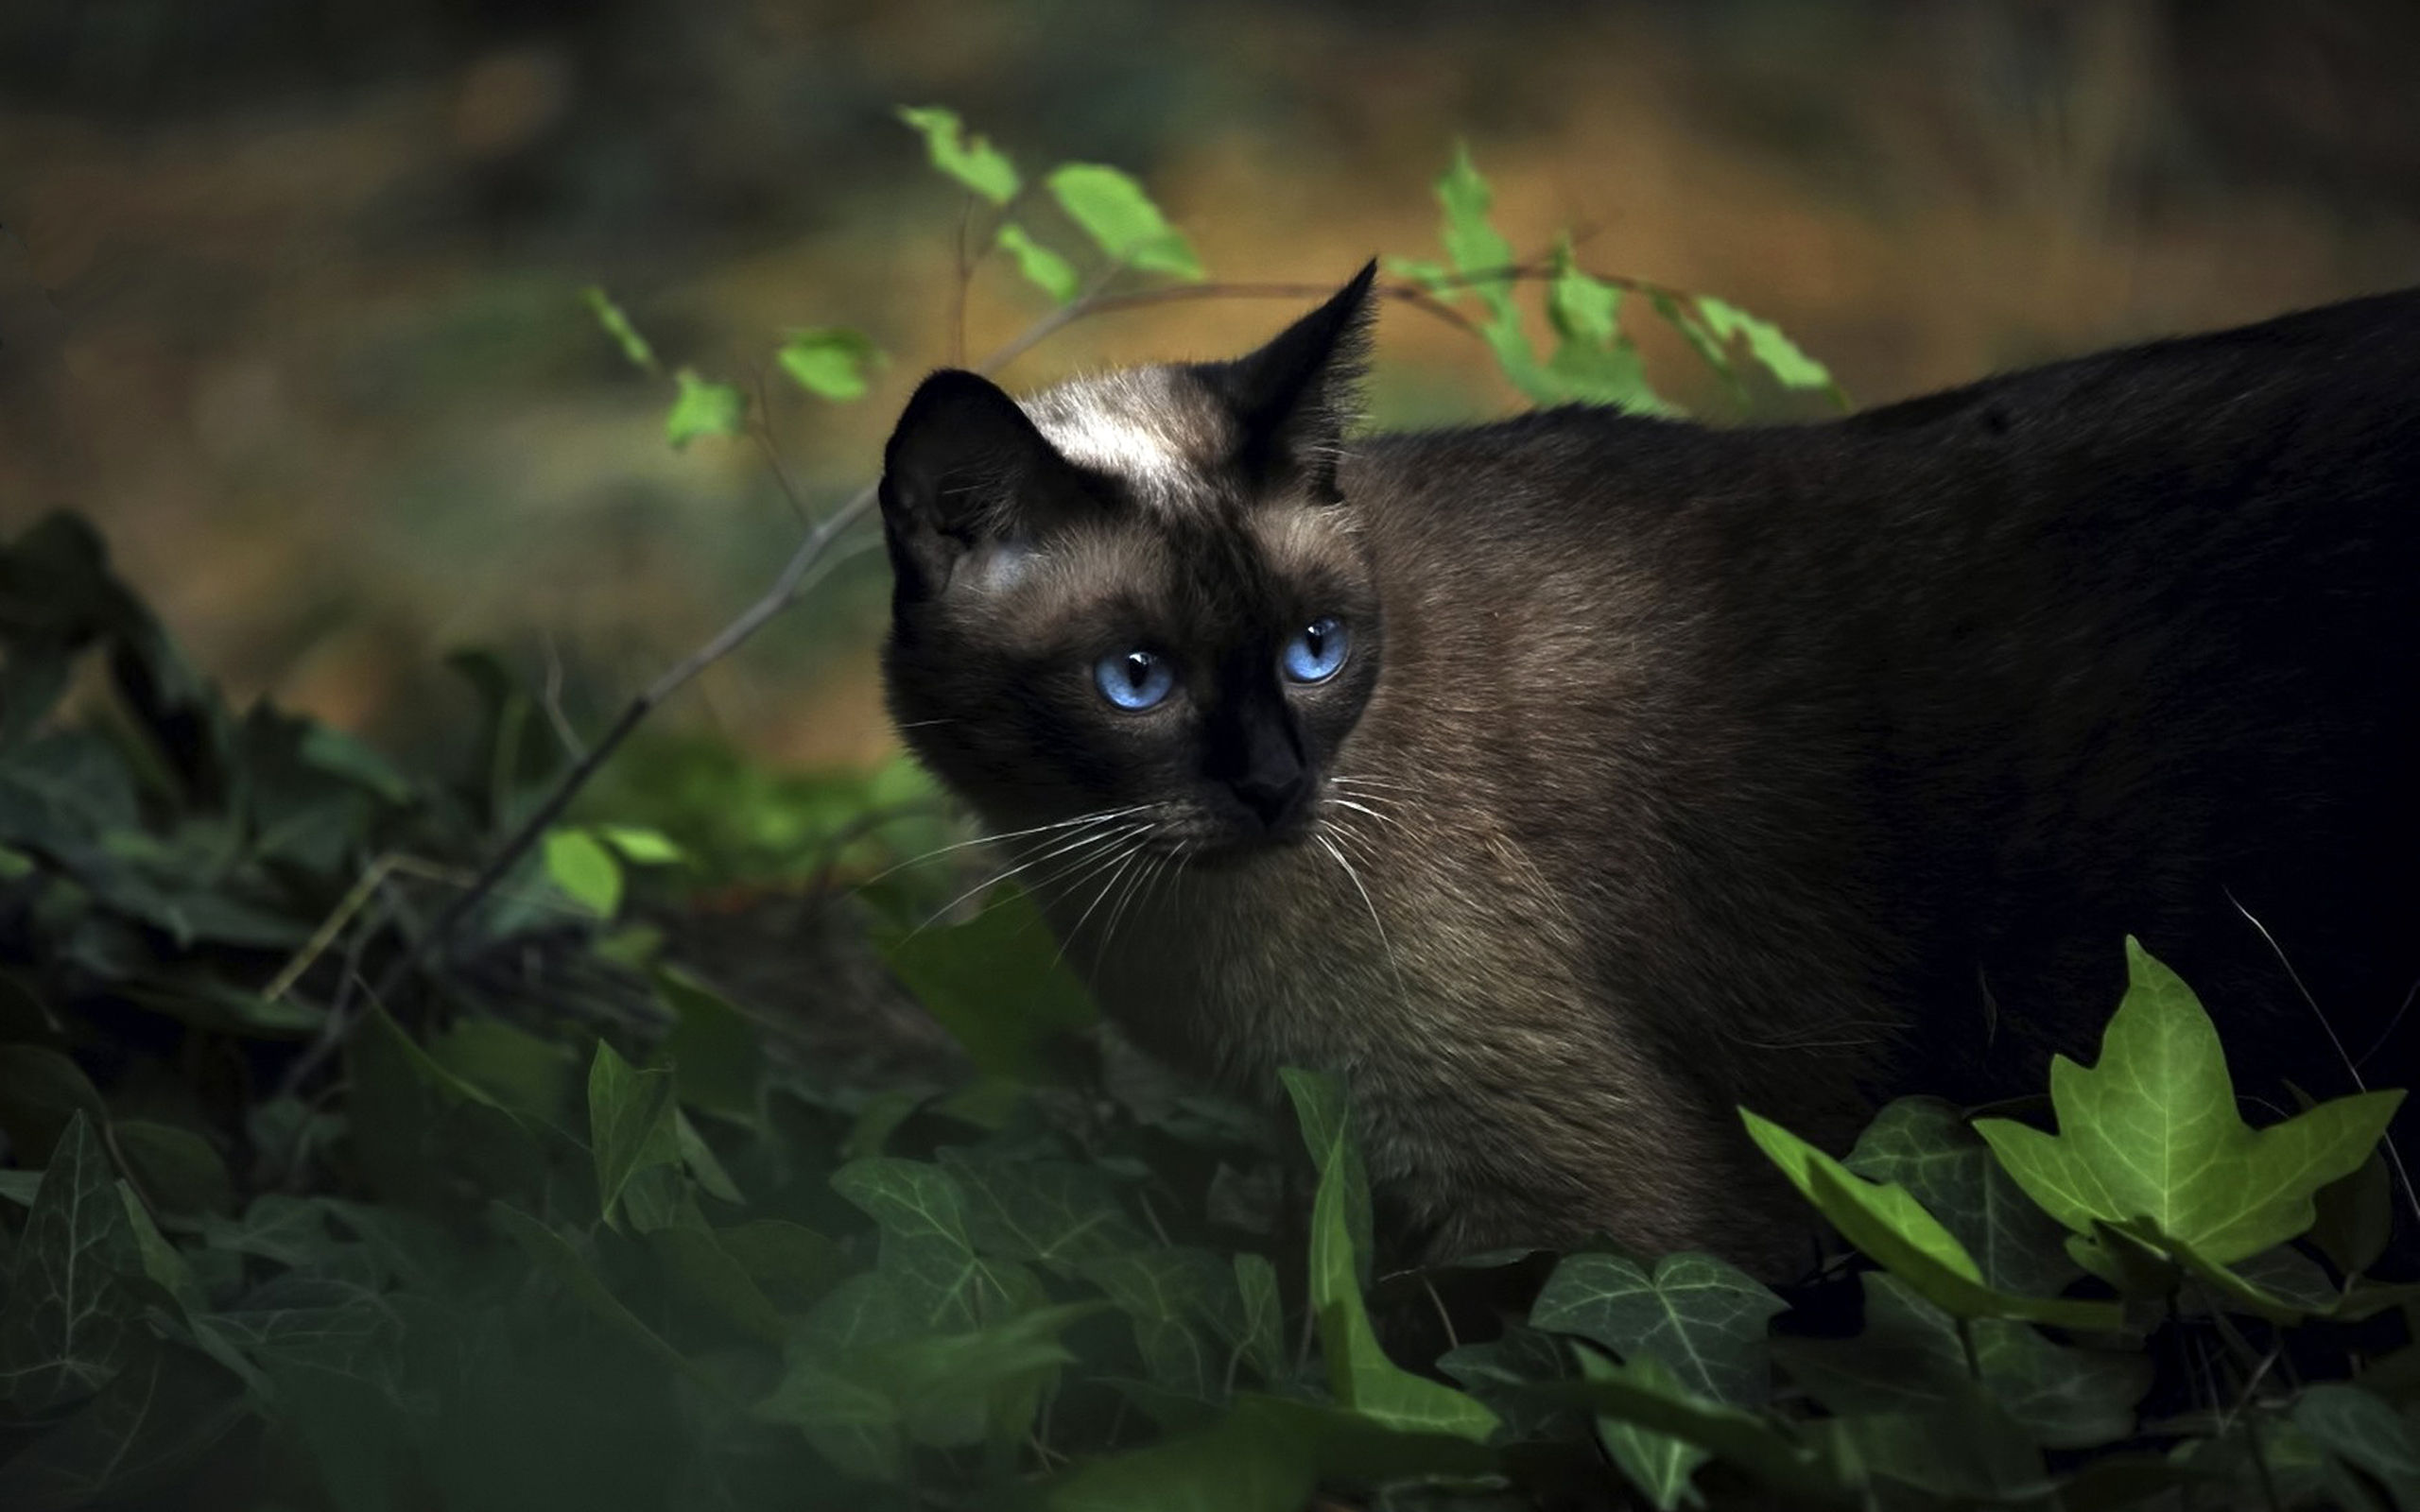 android blue eyes, cat, cats, plant, animal